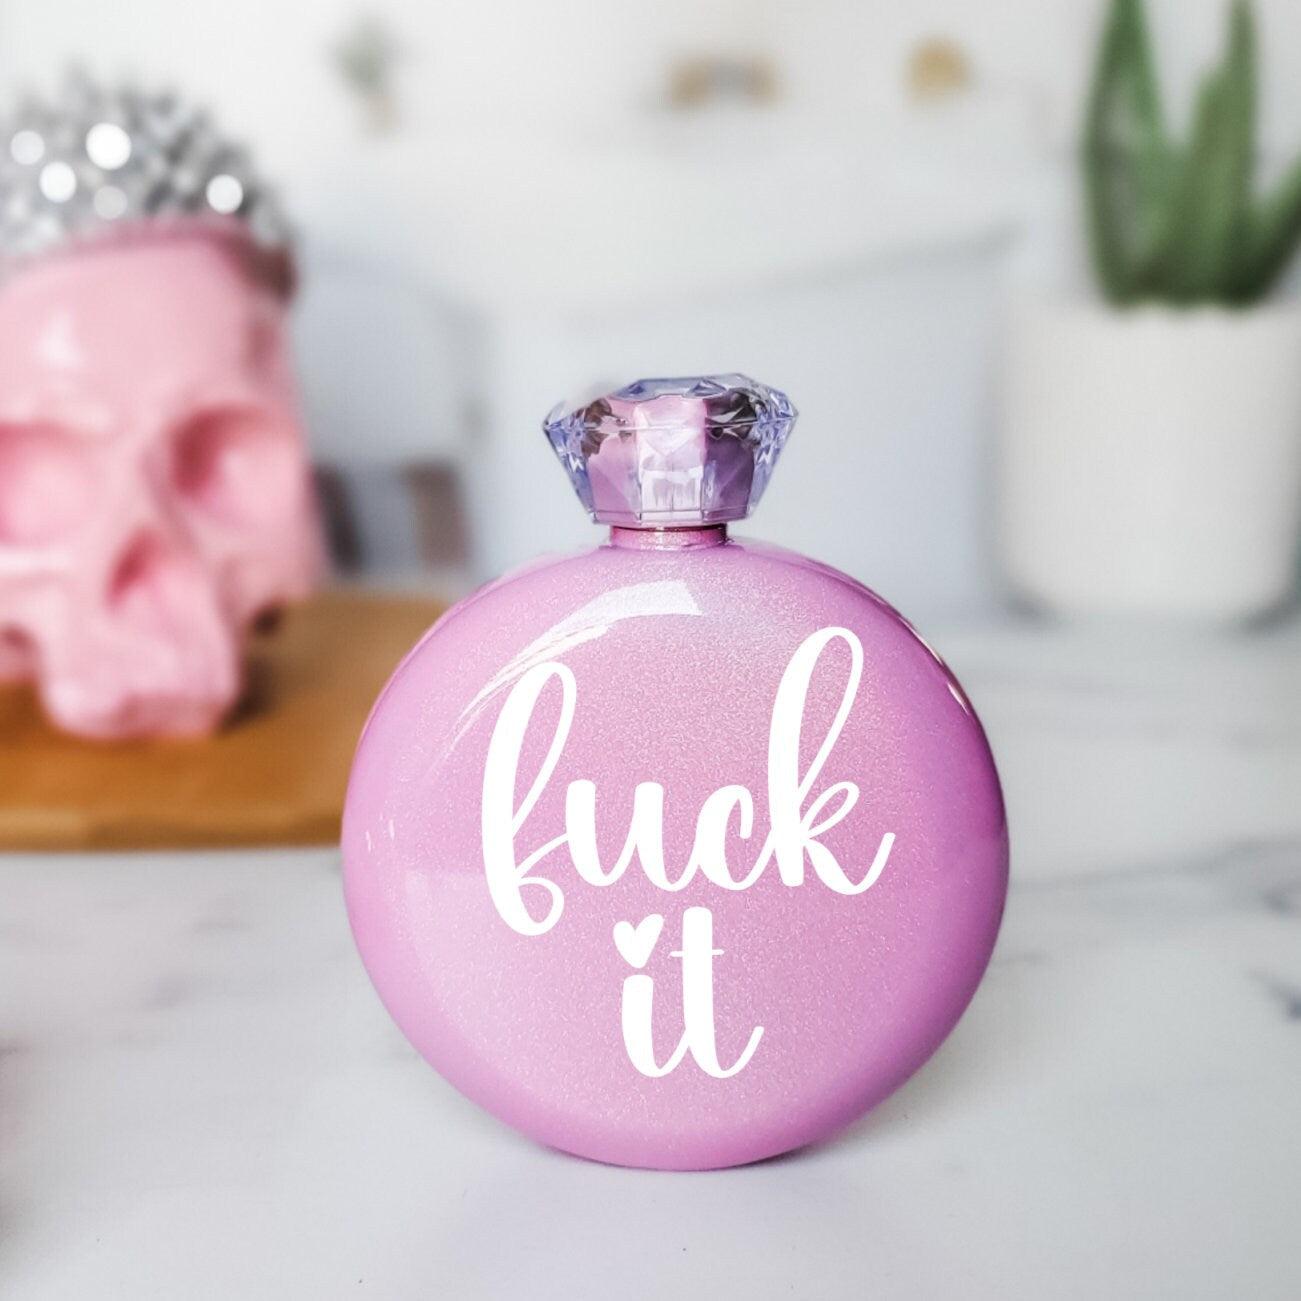 Girls Trip Flask - F*ck it Woman's Flask - Funny Gift for 21st Birthday for Her - Jewel Flask for Bachelorette Party - Glam Glitter Flask